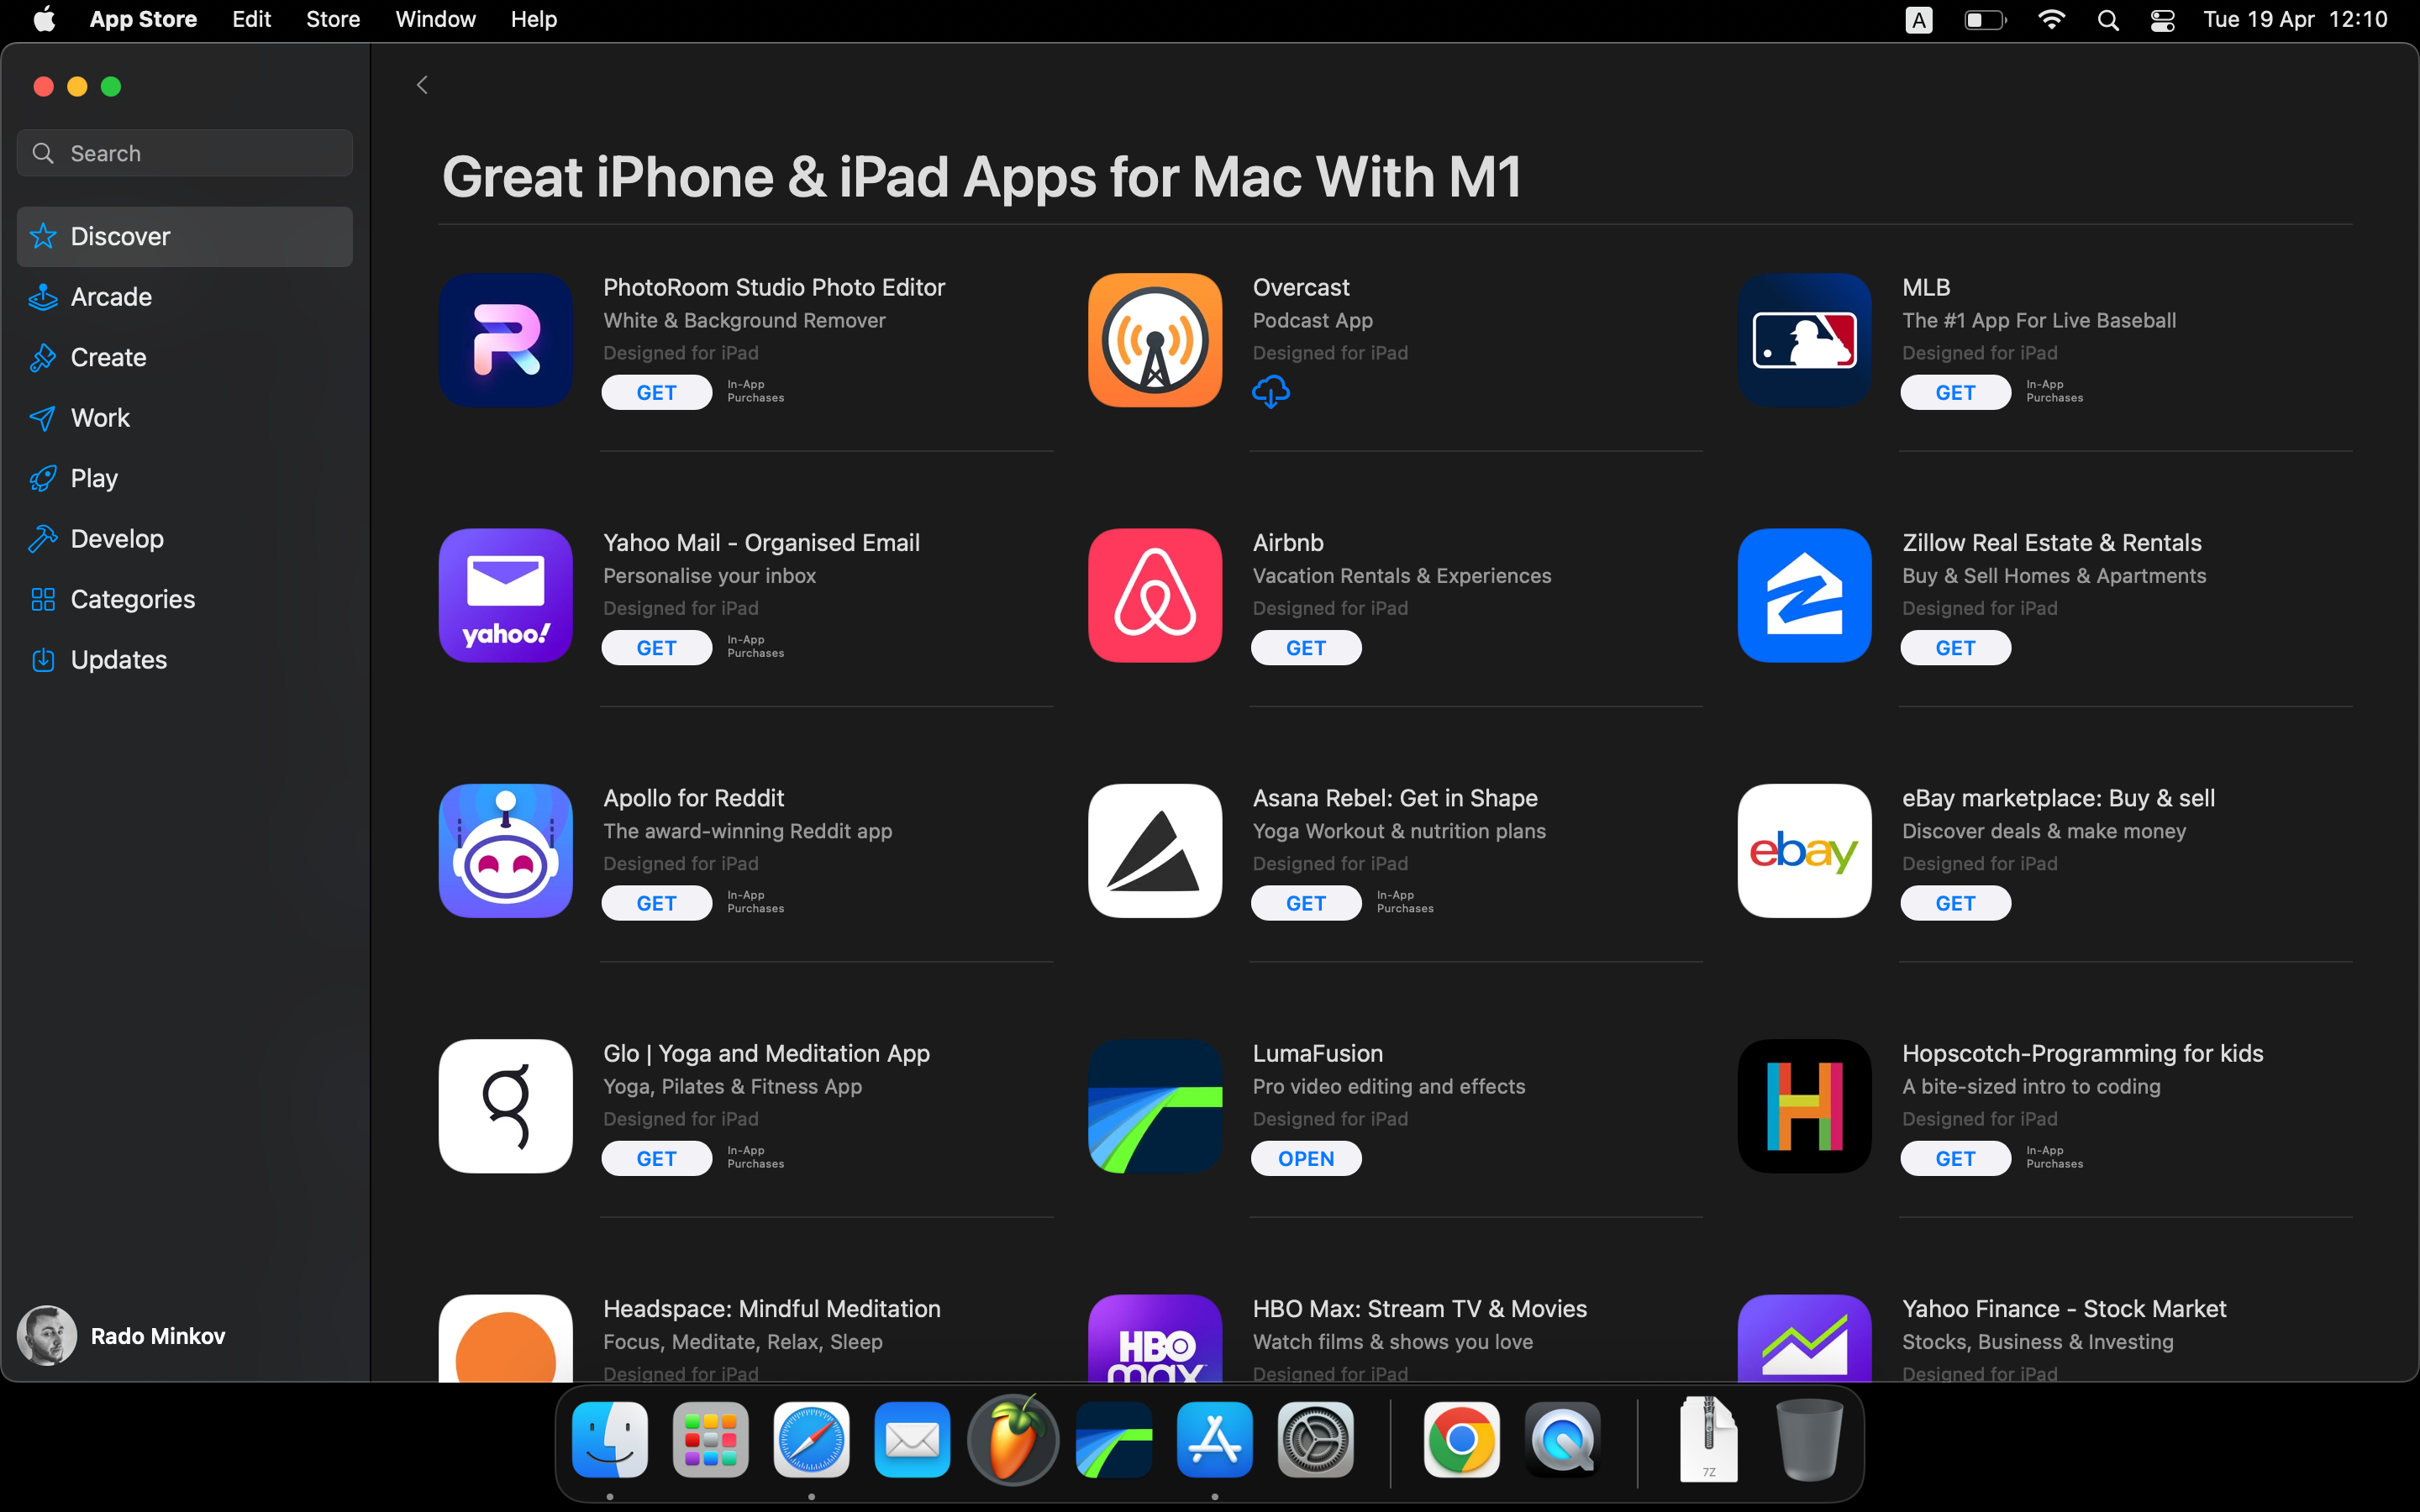 You can download and run these 'designed for iPad' apps on your M1 MacBook now - Instead of the iPad becoming more like a MacBook, it’s the opposite! An iPad power user's thoughts